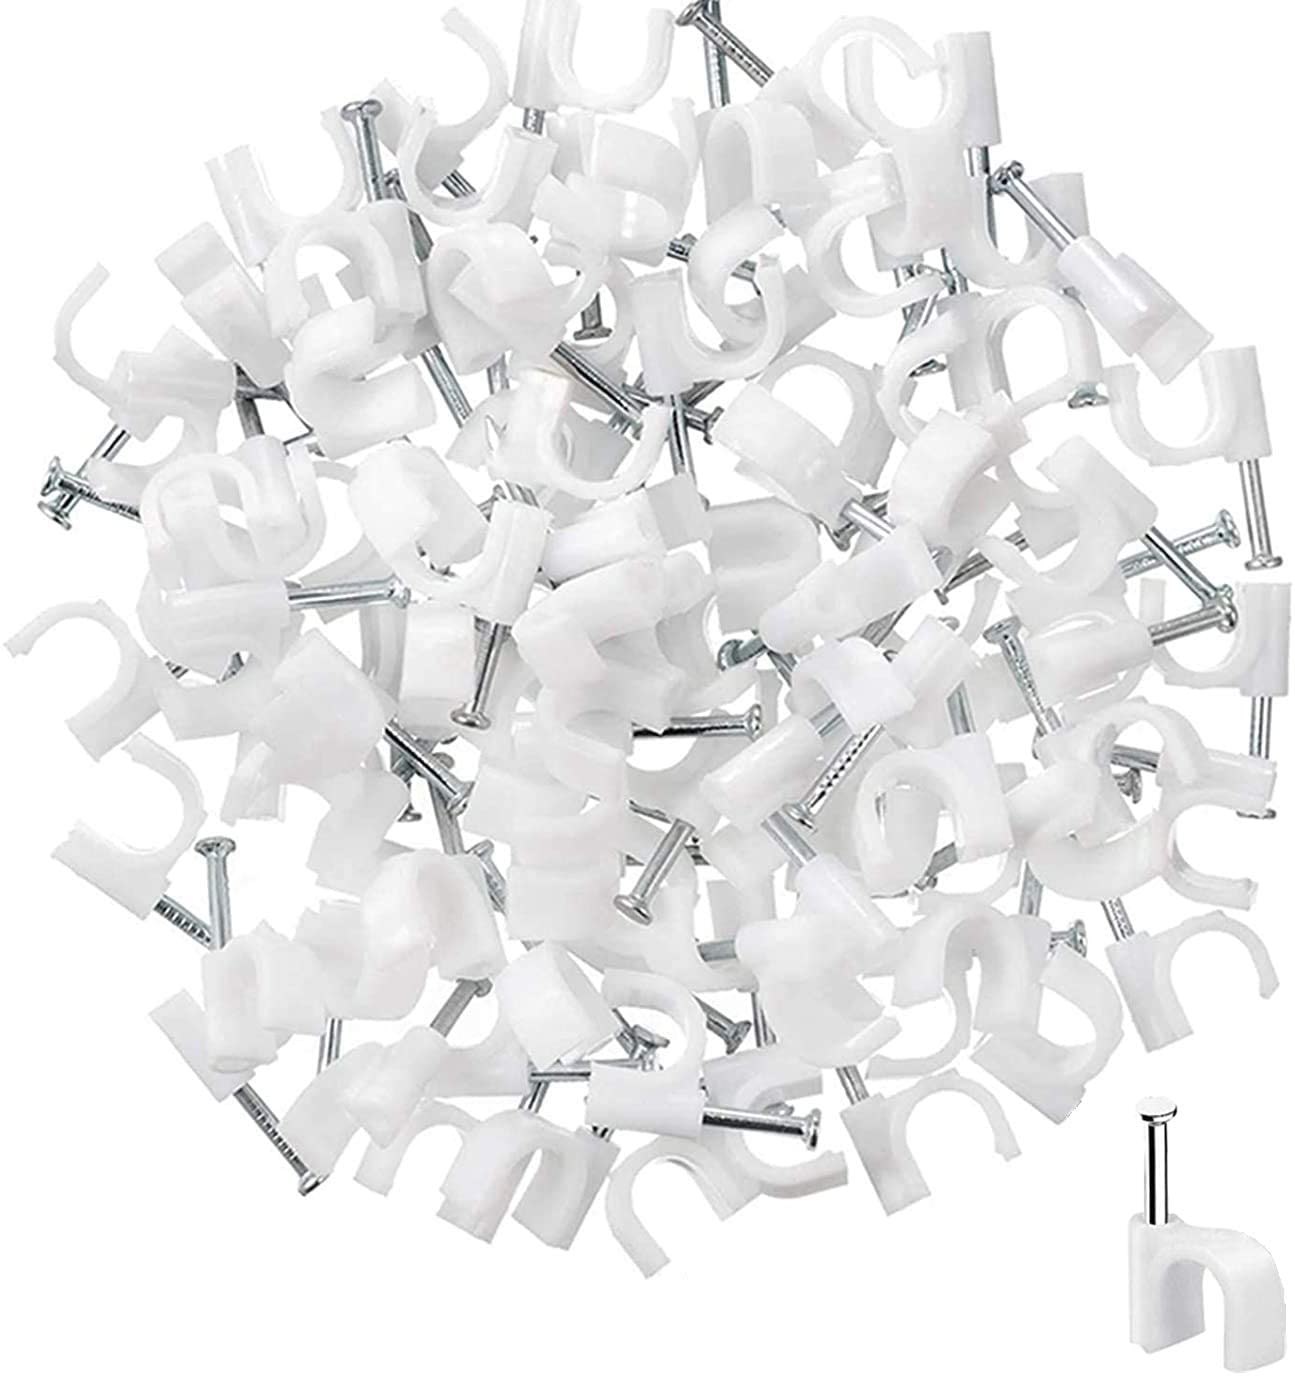 200 PCS Cable Clips, 4mm Nylon Fastener Cable Staples with Steel Nail. - e4cents